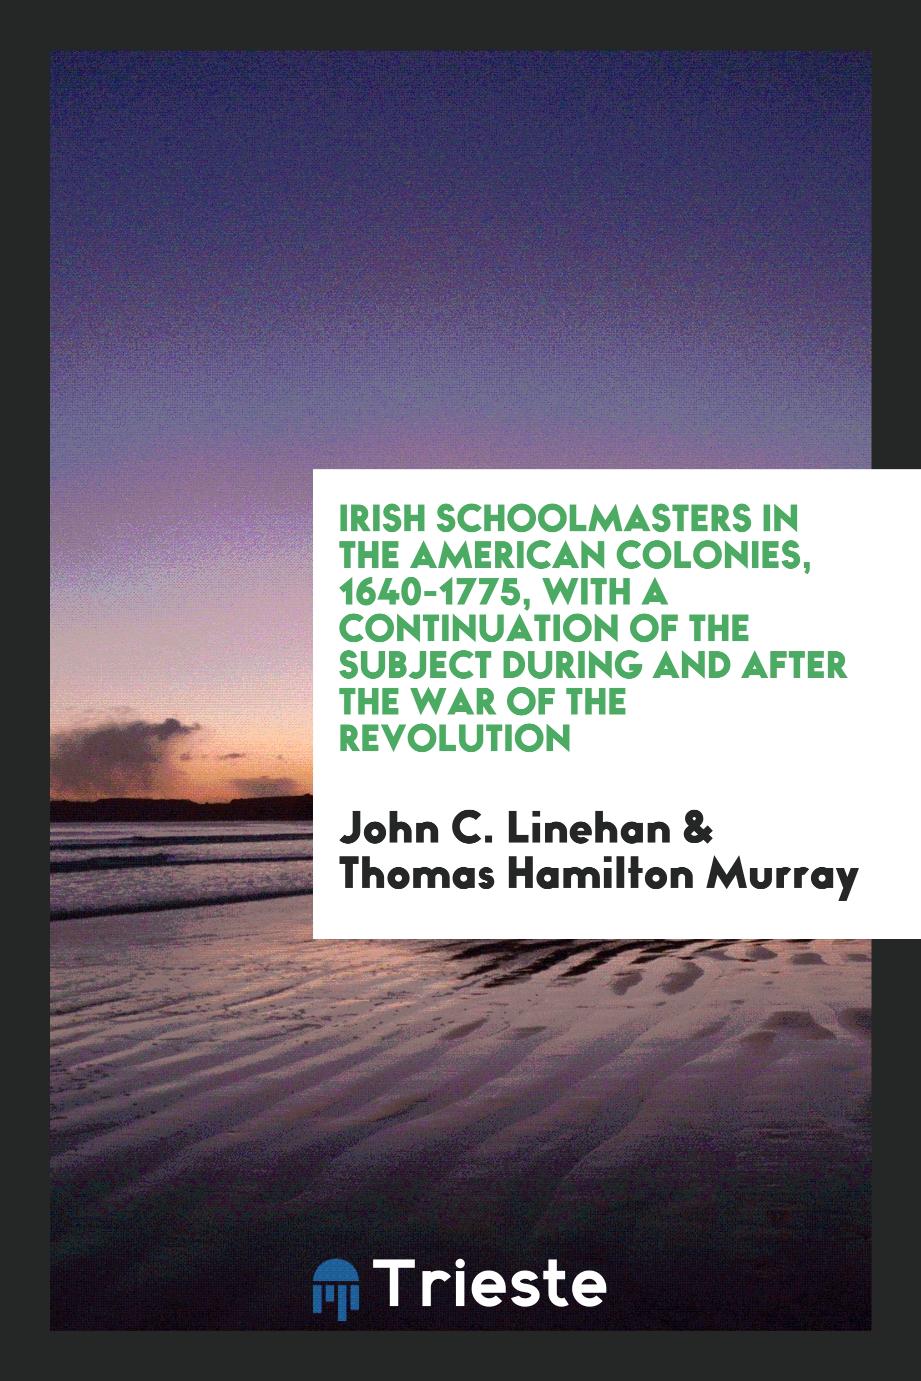 Irish Schoolmasters in the American Colonies, 1640-1775, with a Continuation of the Subject During and After the War of the Revolution